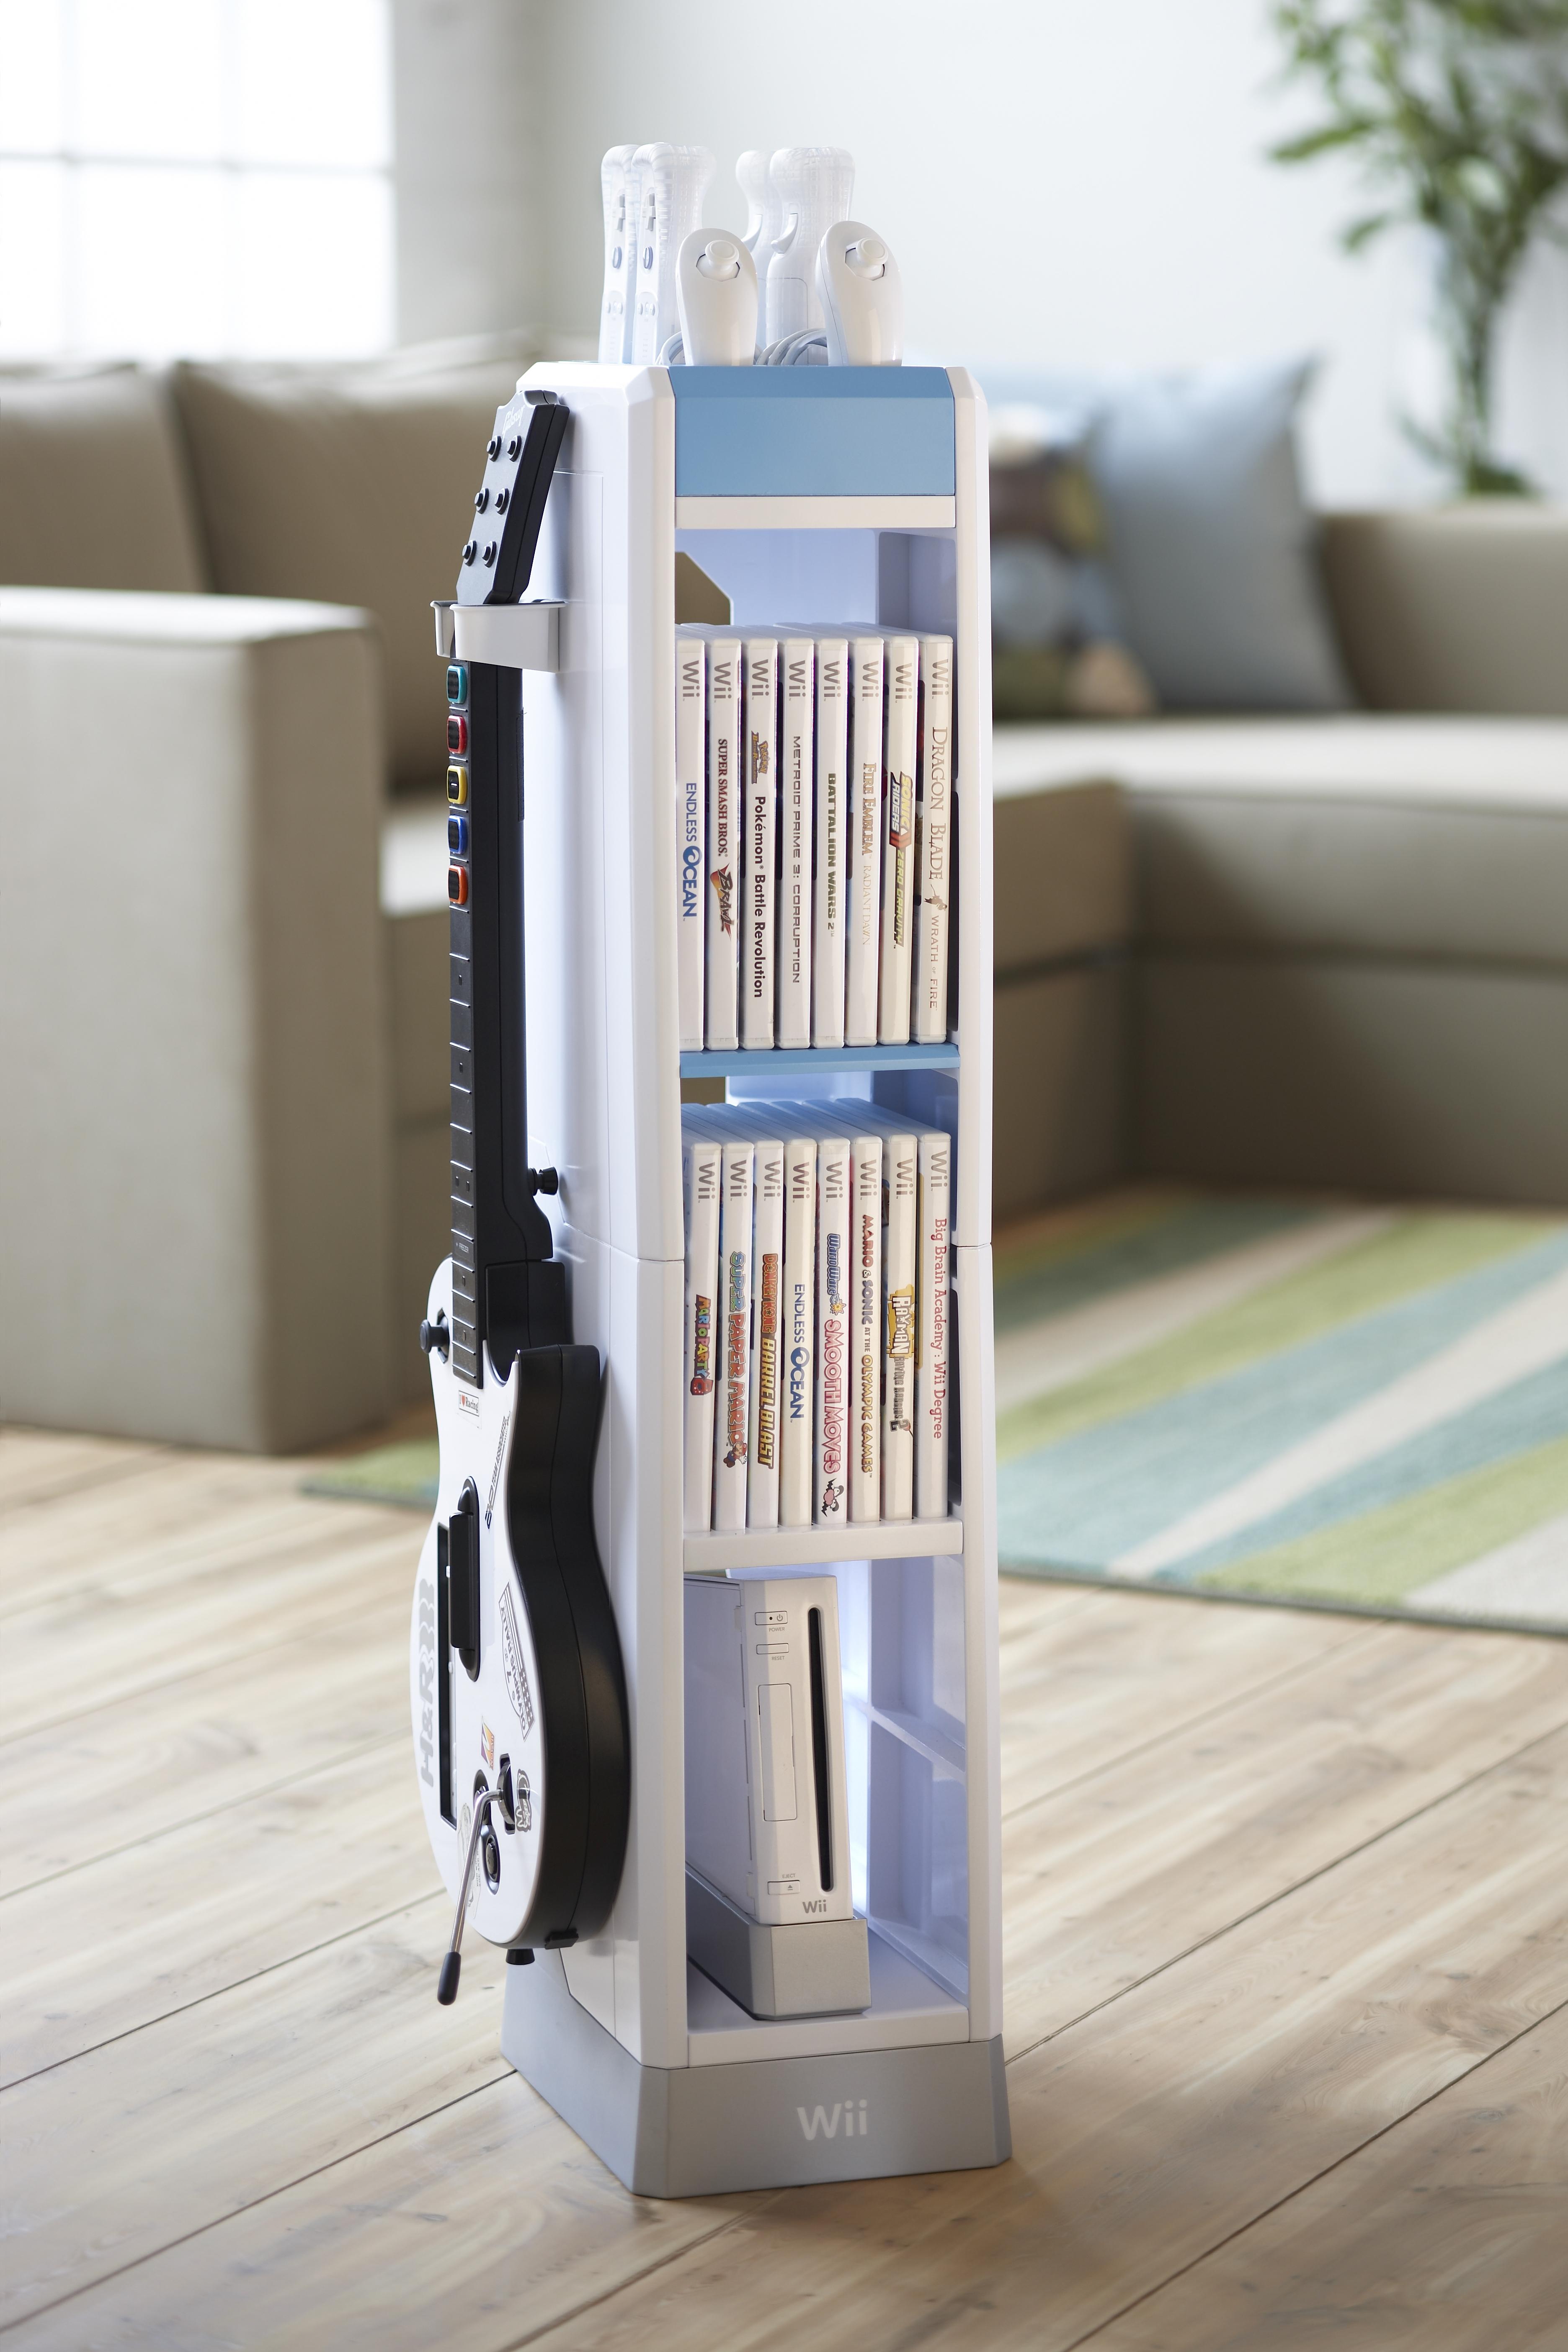 ... Introduces All-In-One Storage Solutions for Wii and Xbox Gaming Gear